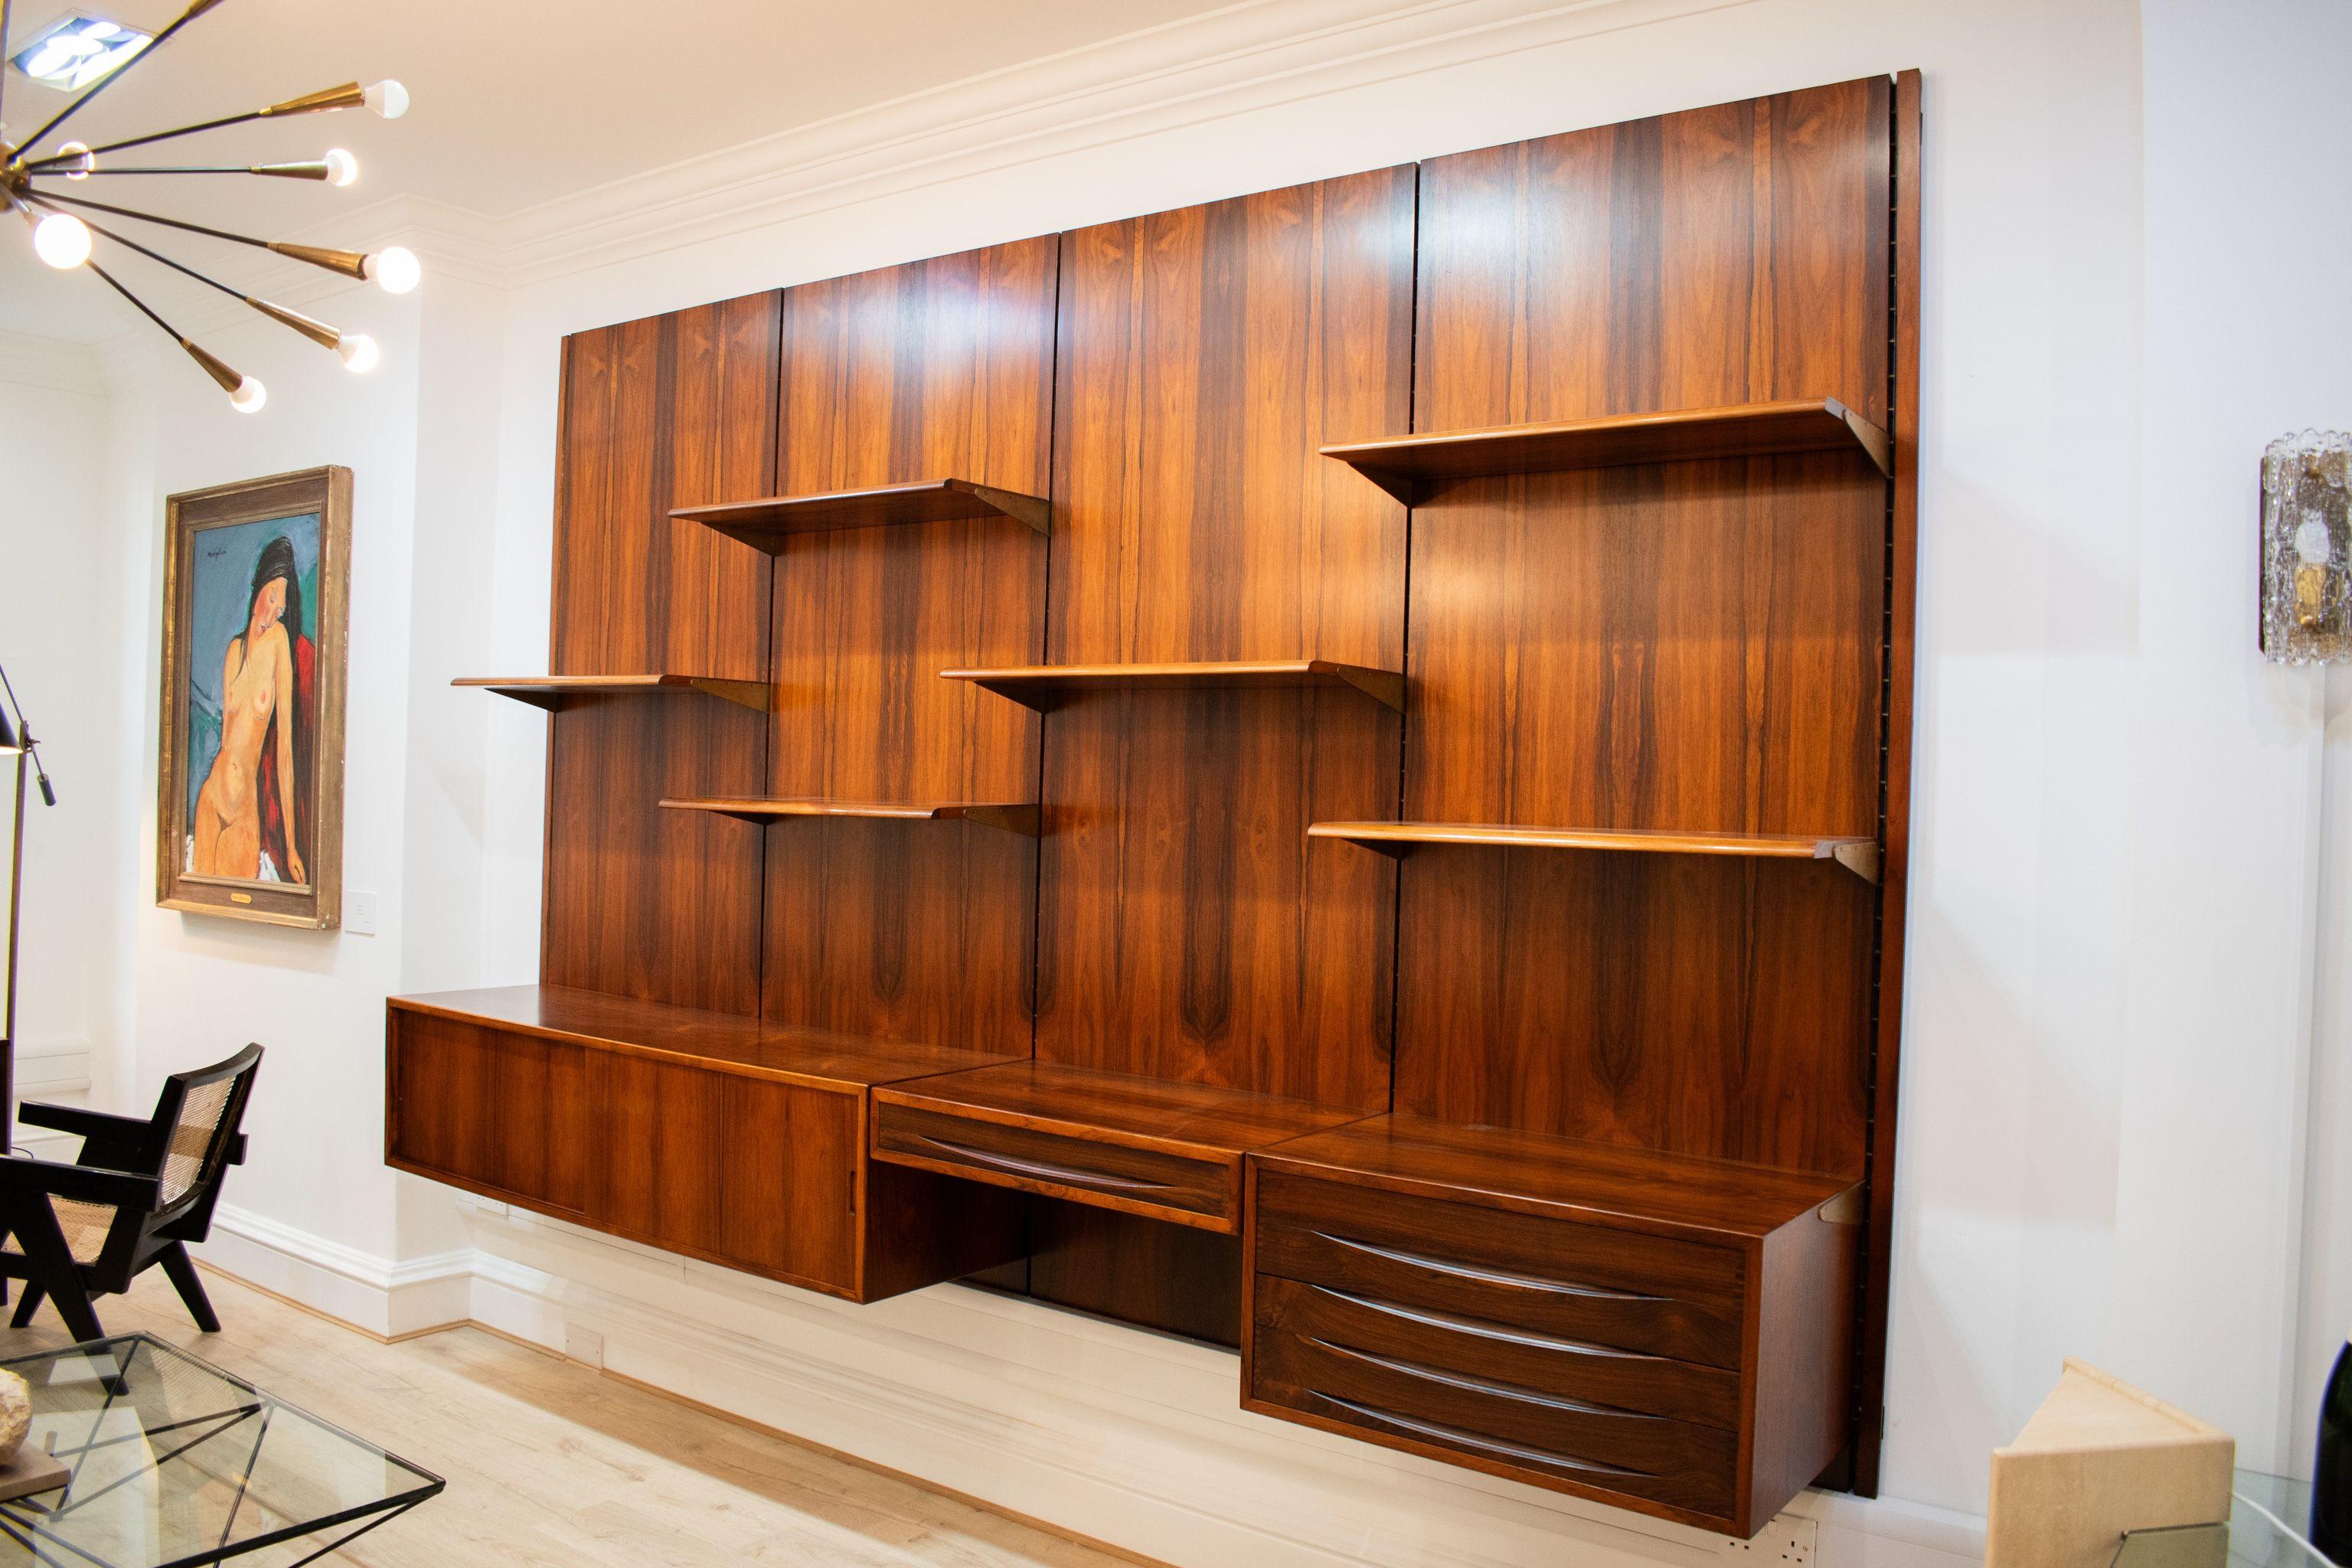 An exquisite Rosewood Bookcase/Wall Unit, designed by the renowned Danish architect and designer, Finn Juhl, and manufactured by Bovirke in the 1960s. 

This exceptional piece showcases the timeless craftsmanship and innovative design that made Finn